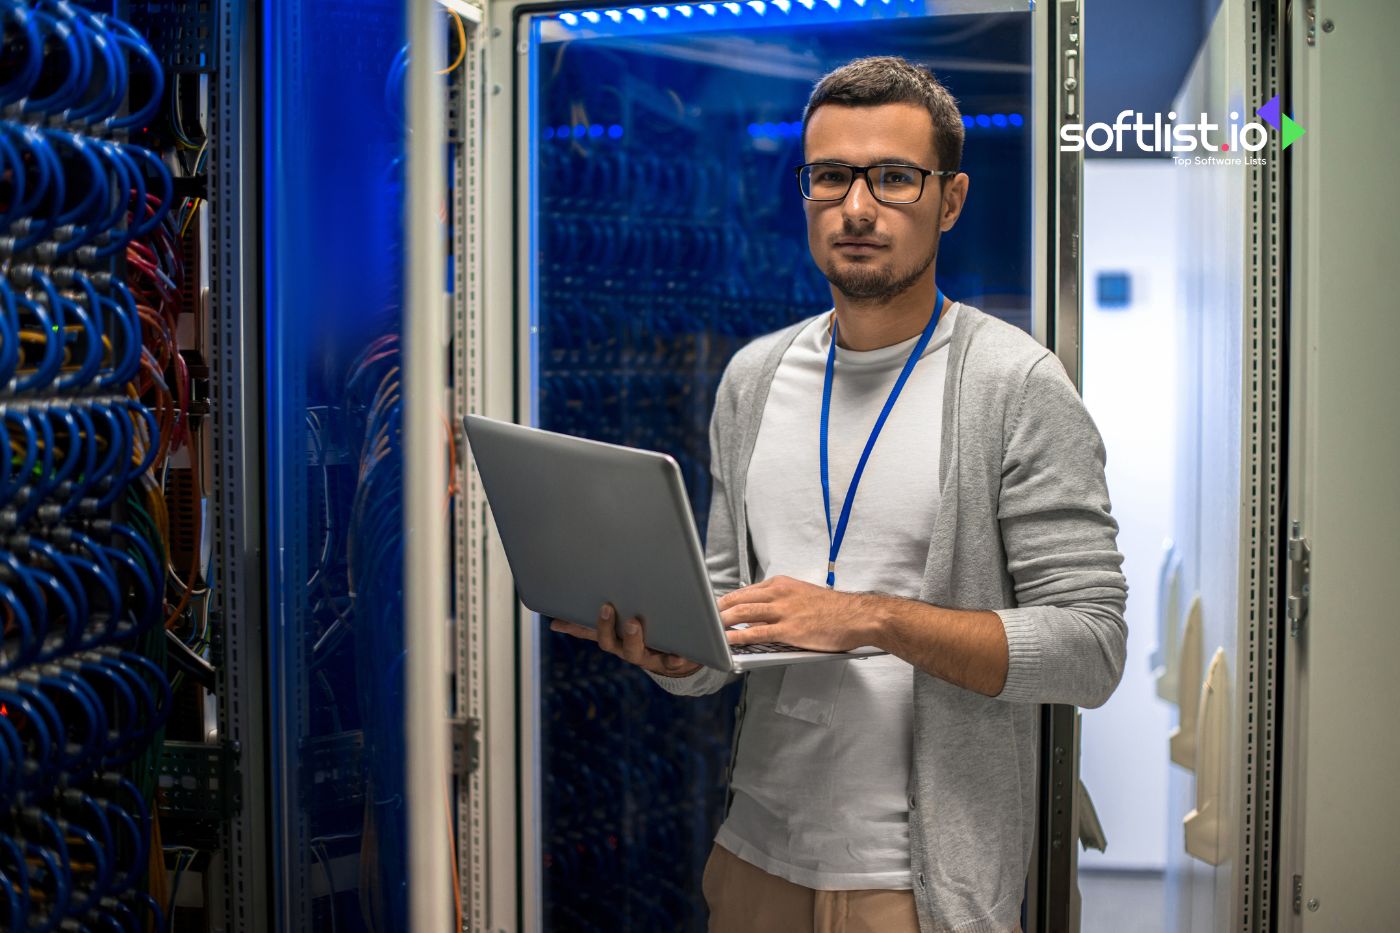 Technician holding a laptop, standing in a blue-lit server room